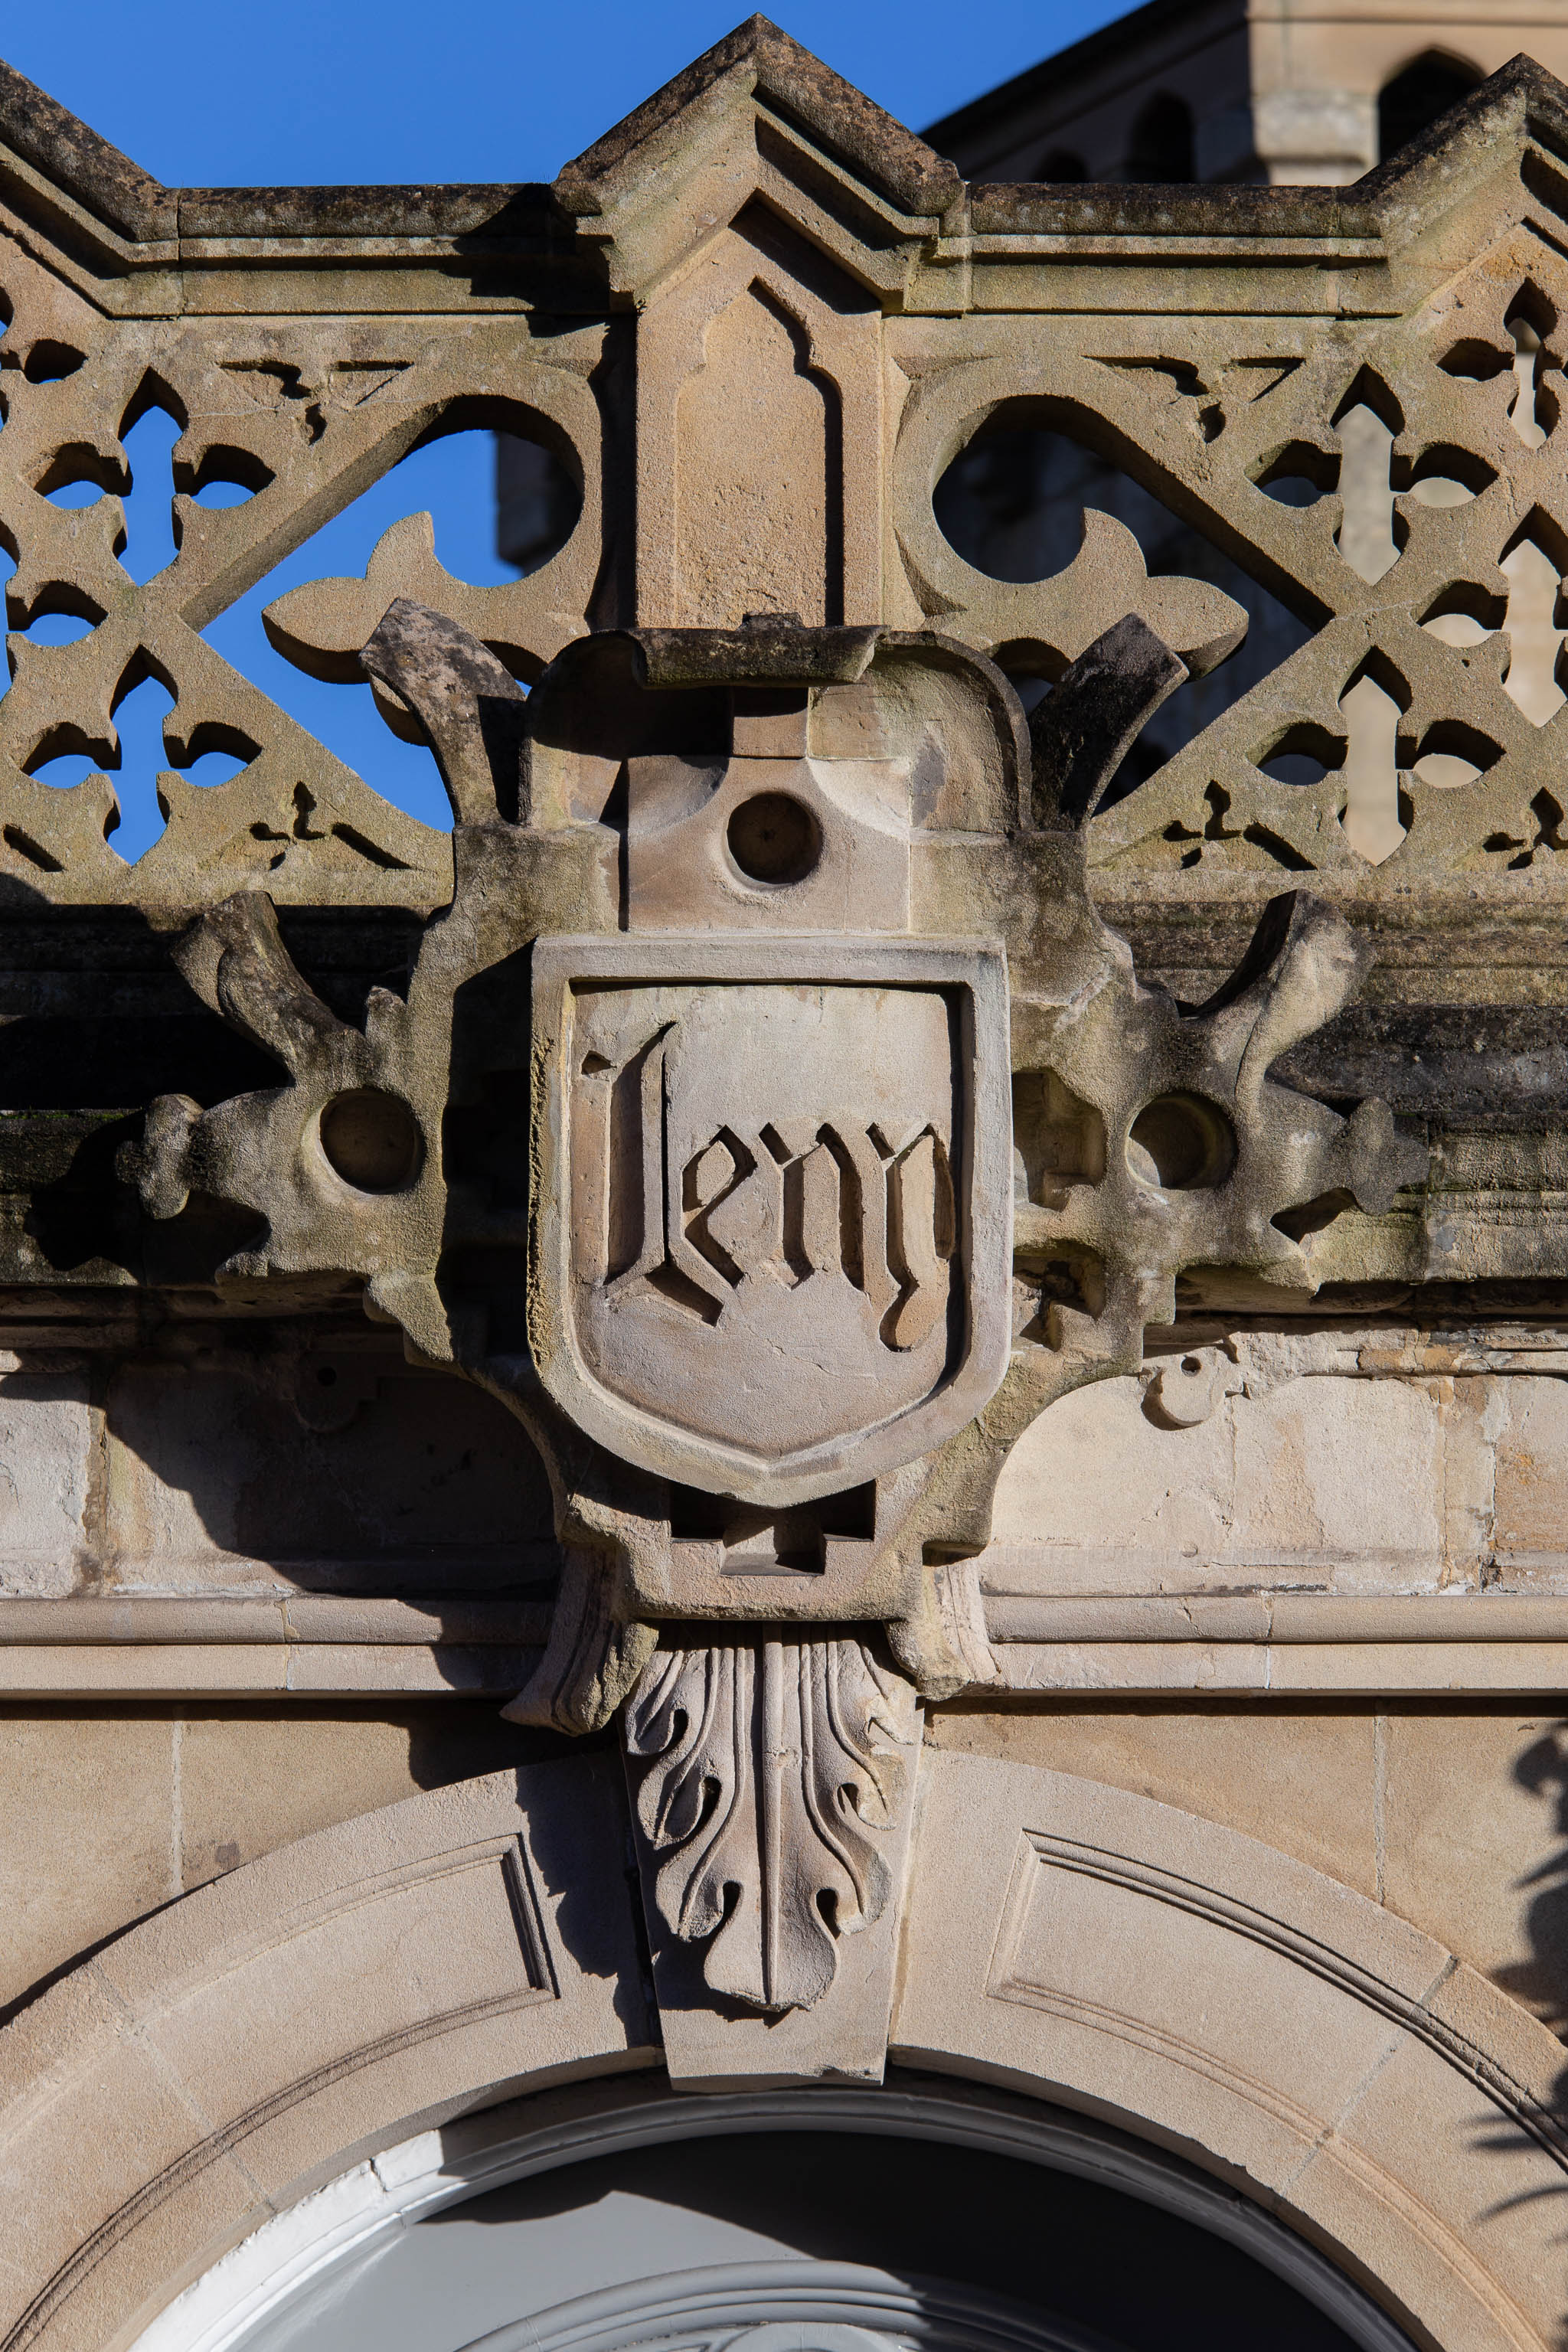 Leny
As a Lovecraft fan, I had of course read this as "Leng", but it's actually "Leny". LENY AND ATTACHED GATEWAY AND FRONT GARDEN WALLS AND RAILINGS
